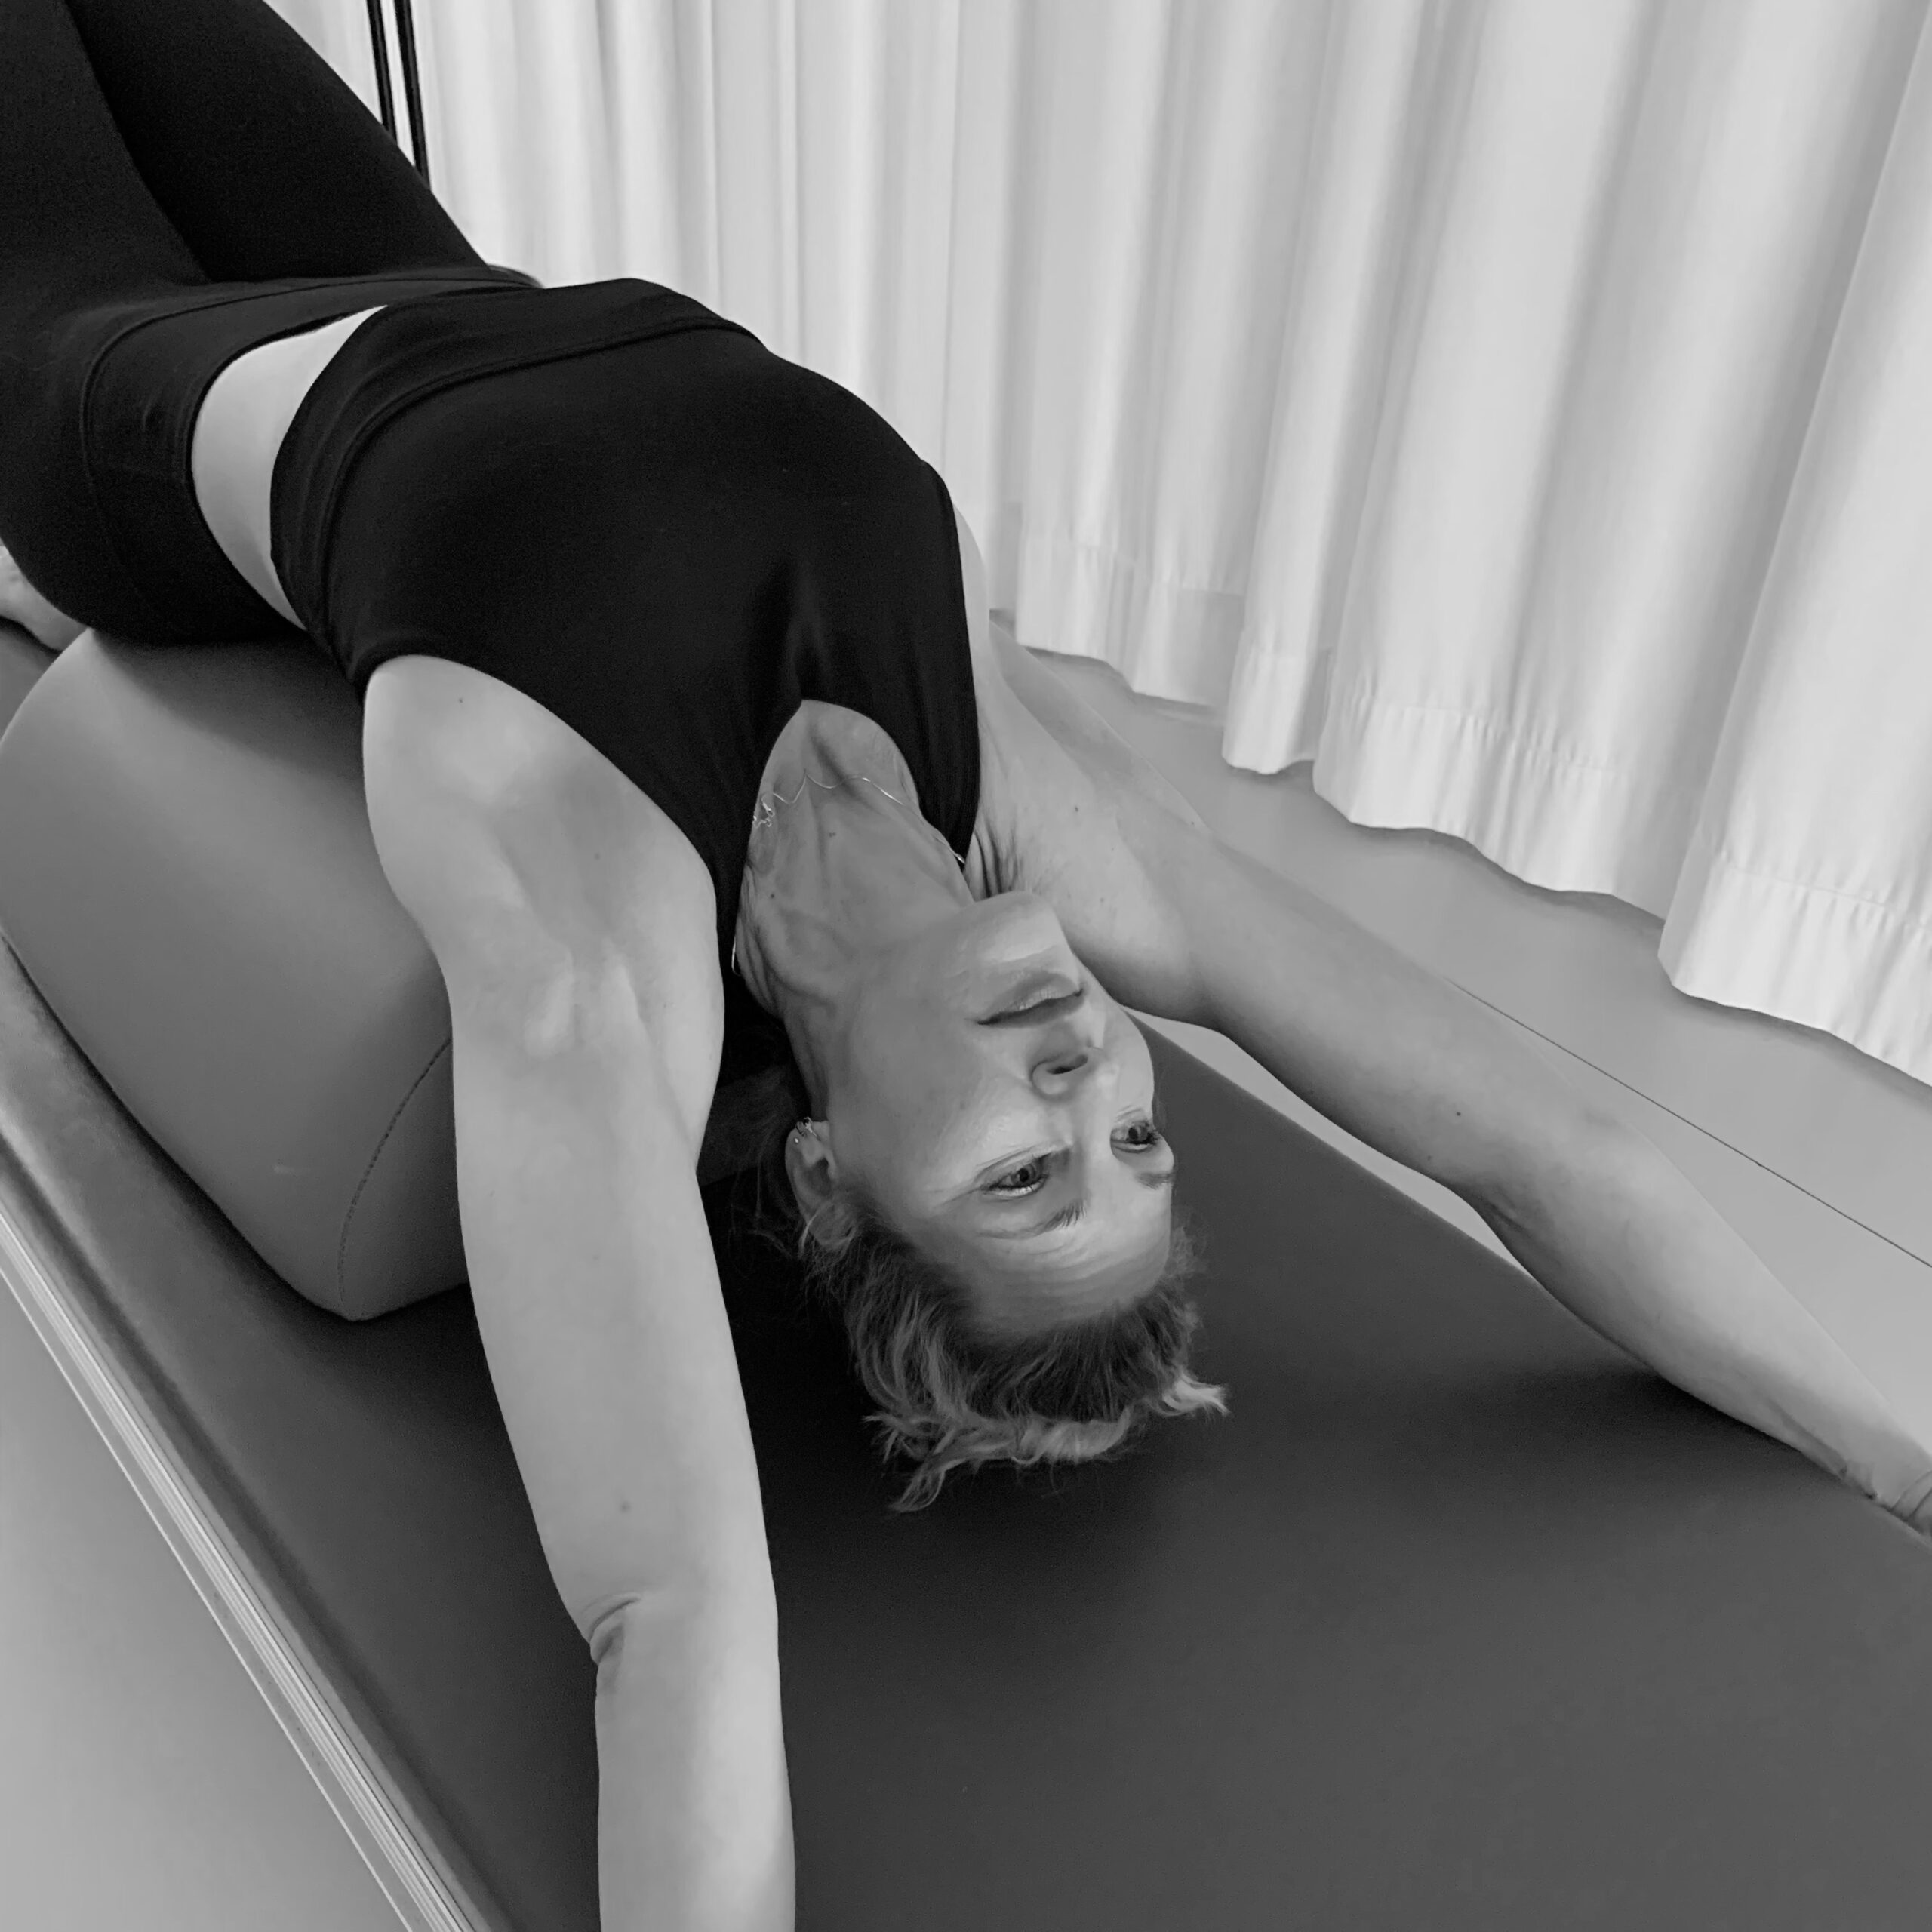 A young woman stretches over the Arc Barrel and enjoys the chest opening in the Pilates Tower Unit workout. Stretching and strengthening the body.